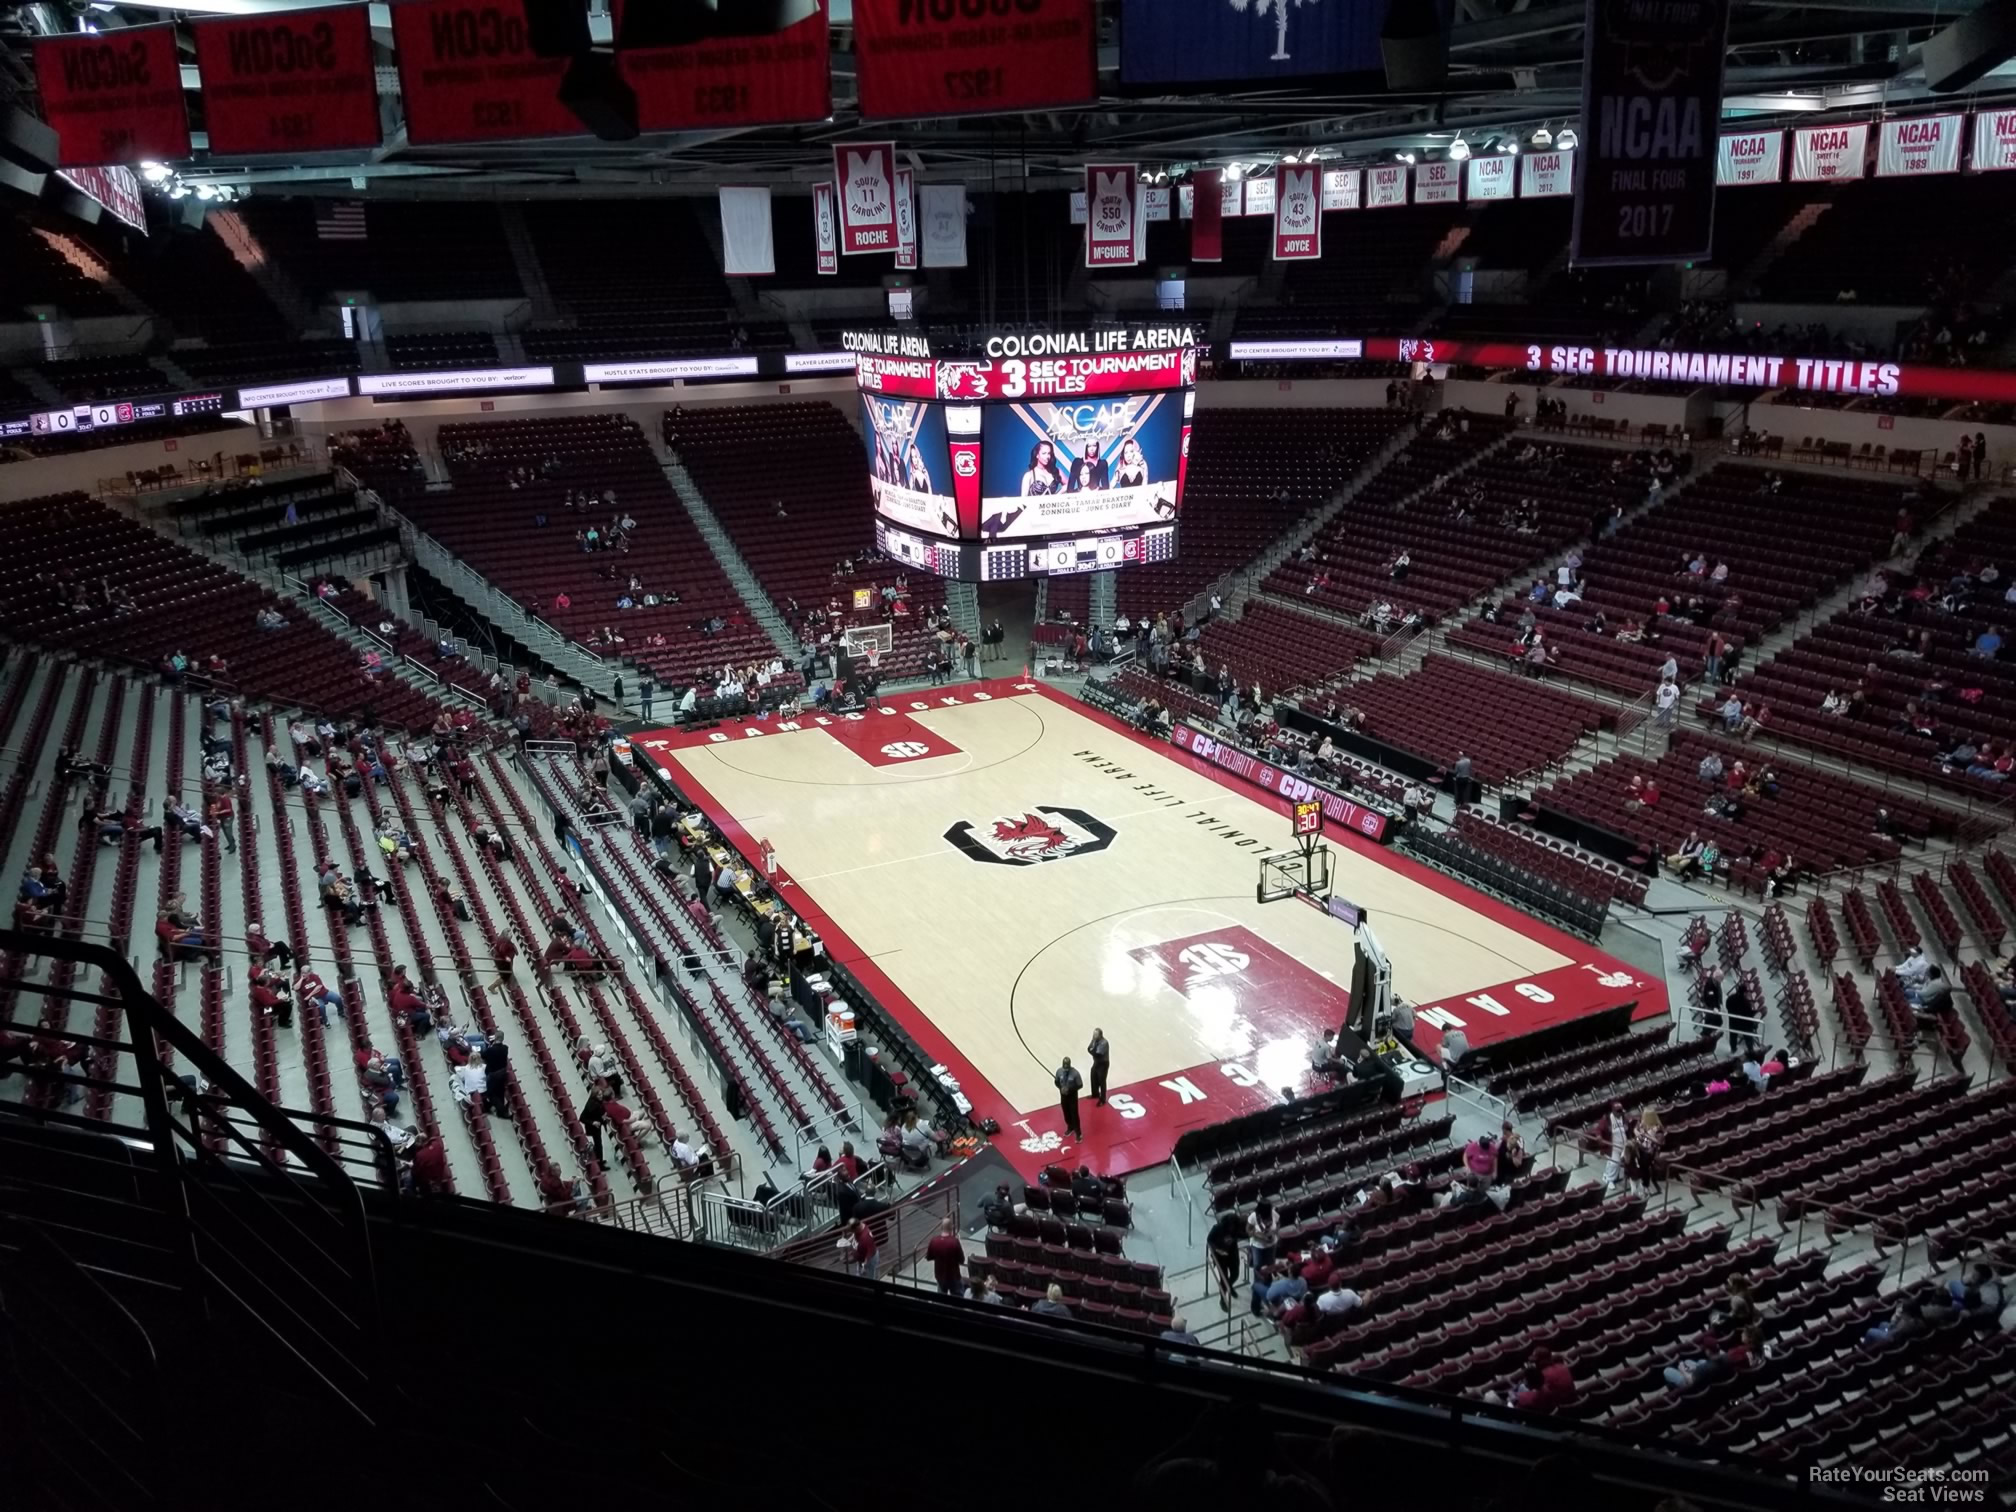 section 203, row 7 seat view  for basketball - colonial life arena